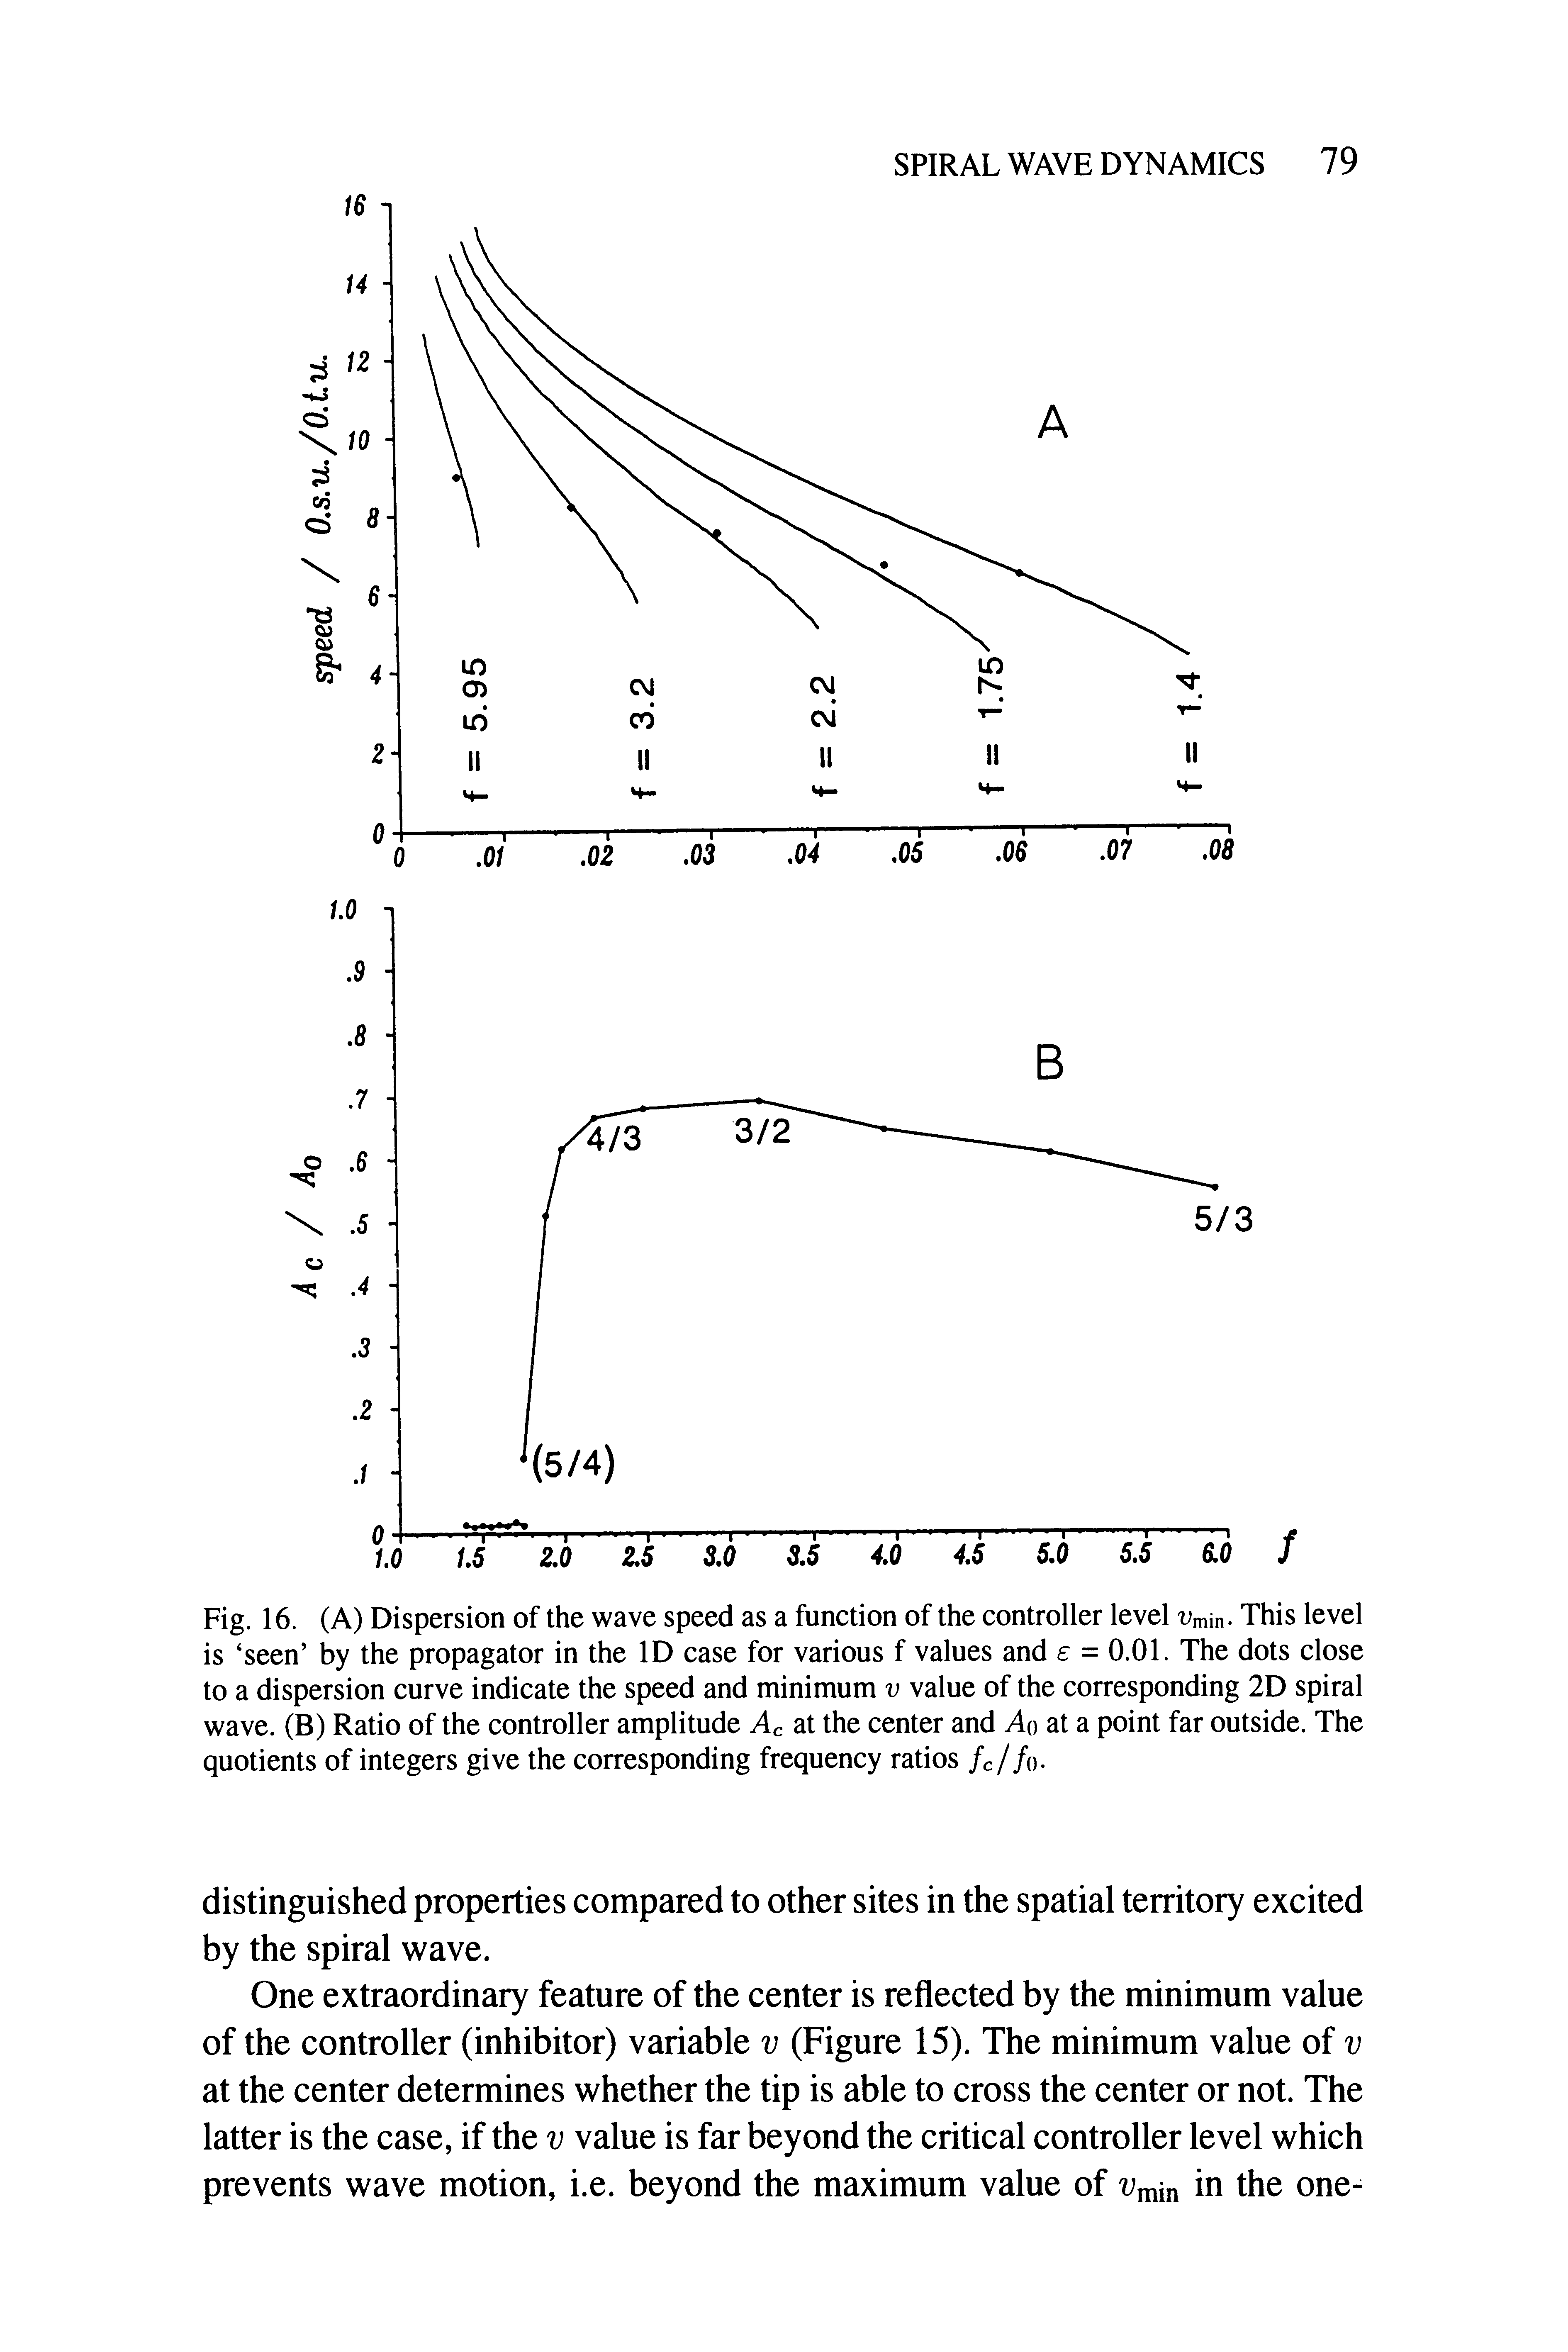 Fig. 16. (A) Dispersion of the wave speed as a function of the controller level tJmin. This level is seen by the propagator in the ID case for various f values and e = 0.01. The dots close to a dispersion curve indicate the speed and minimum v value of the corresponding 2D spiral wave. (B) Ratio of the controller amplitude Ac at the center and An at a point far outside. The quotients of integers give the corresponding frequency ratios /c//o.